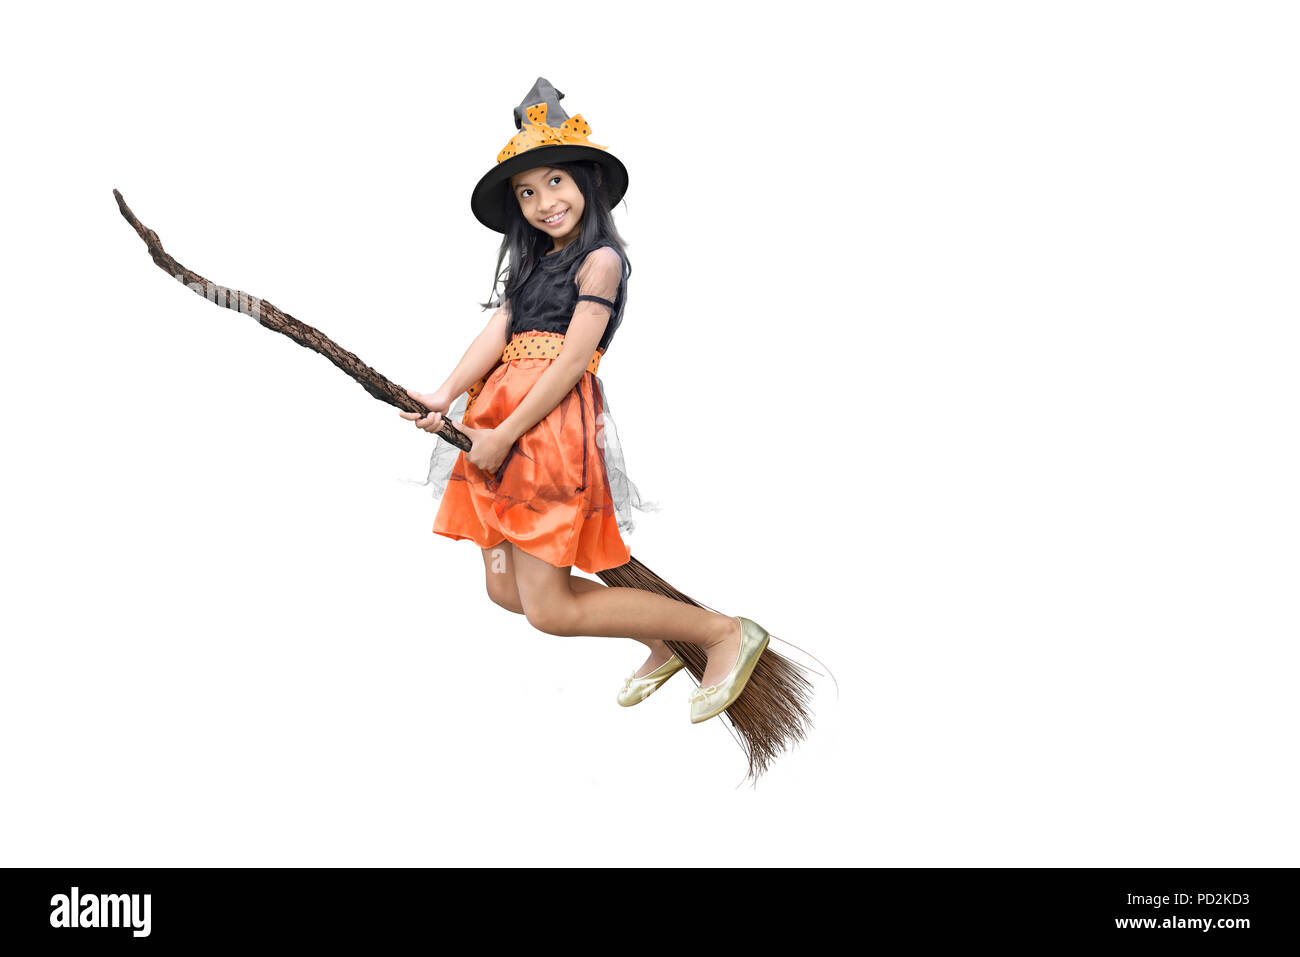 scared-fish939: A magical girl using her powers while flying in the air on  a broom